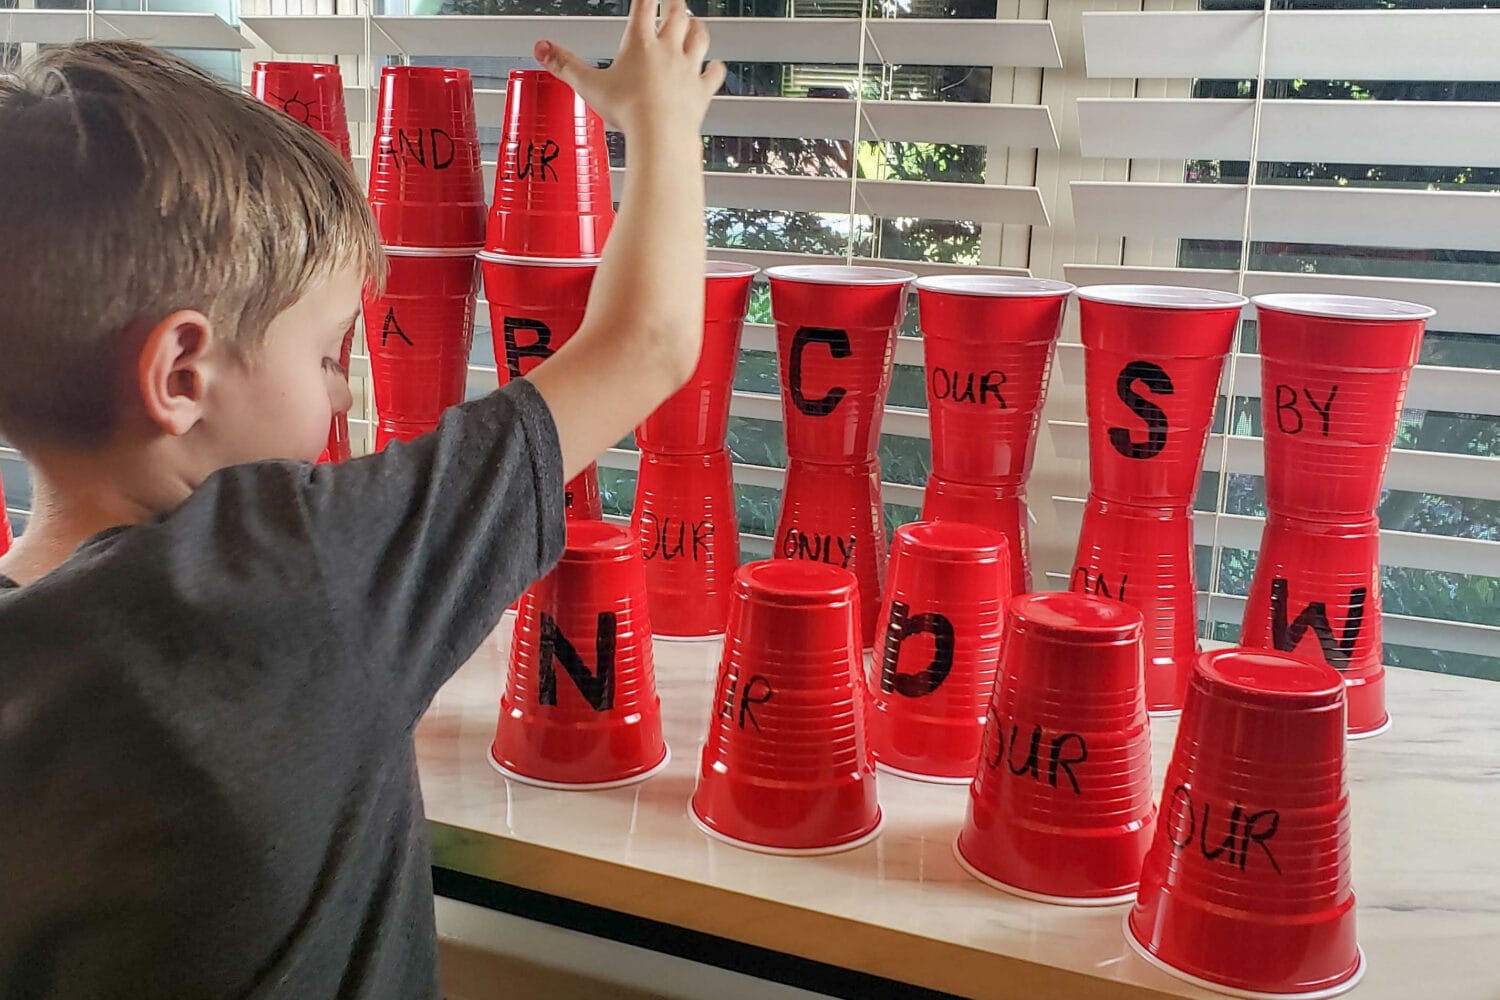 Redeemer of Israel Cup Stacking singing time ideas for LDS Primary Music Leaders. The kids will absolutely love stacking cups in a tall castle wall or pyramid as they learn this beloved Hymn with a crack the code hidden in!